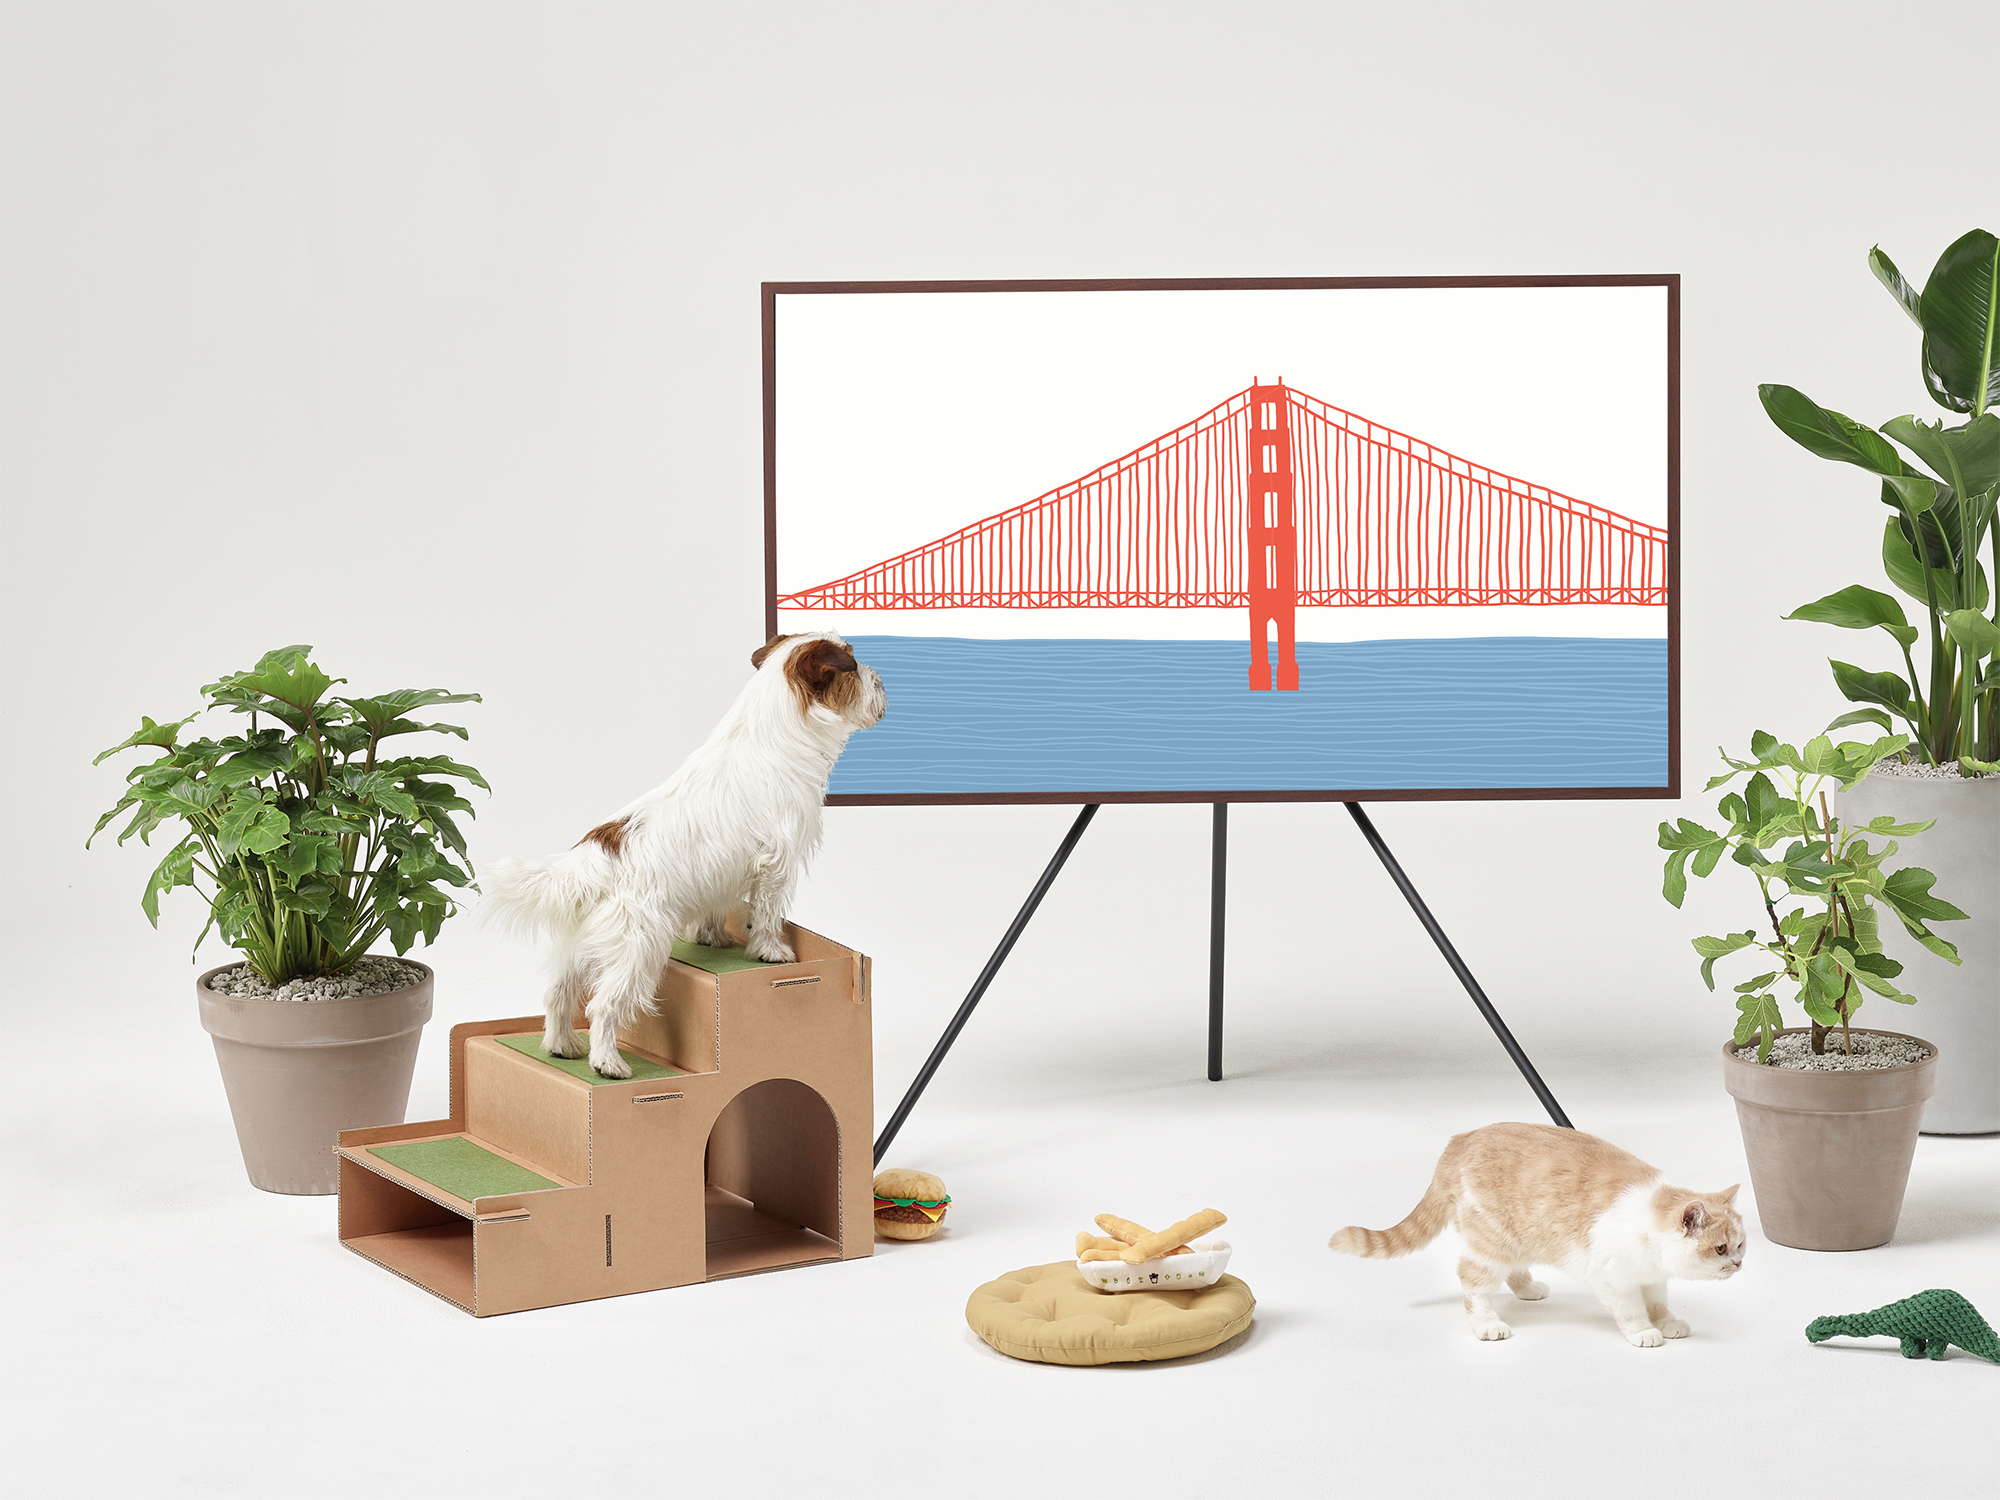 #FurTheWin: Build an eco-friendly home for your pets with Samsung’s boxes